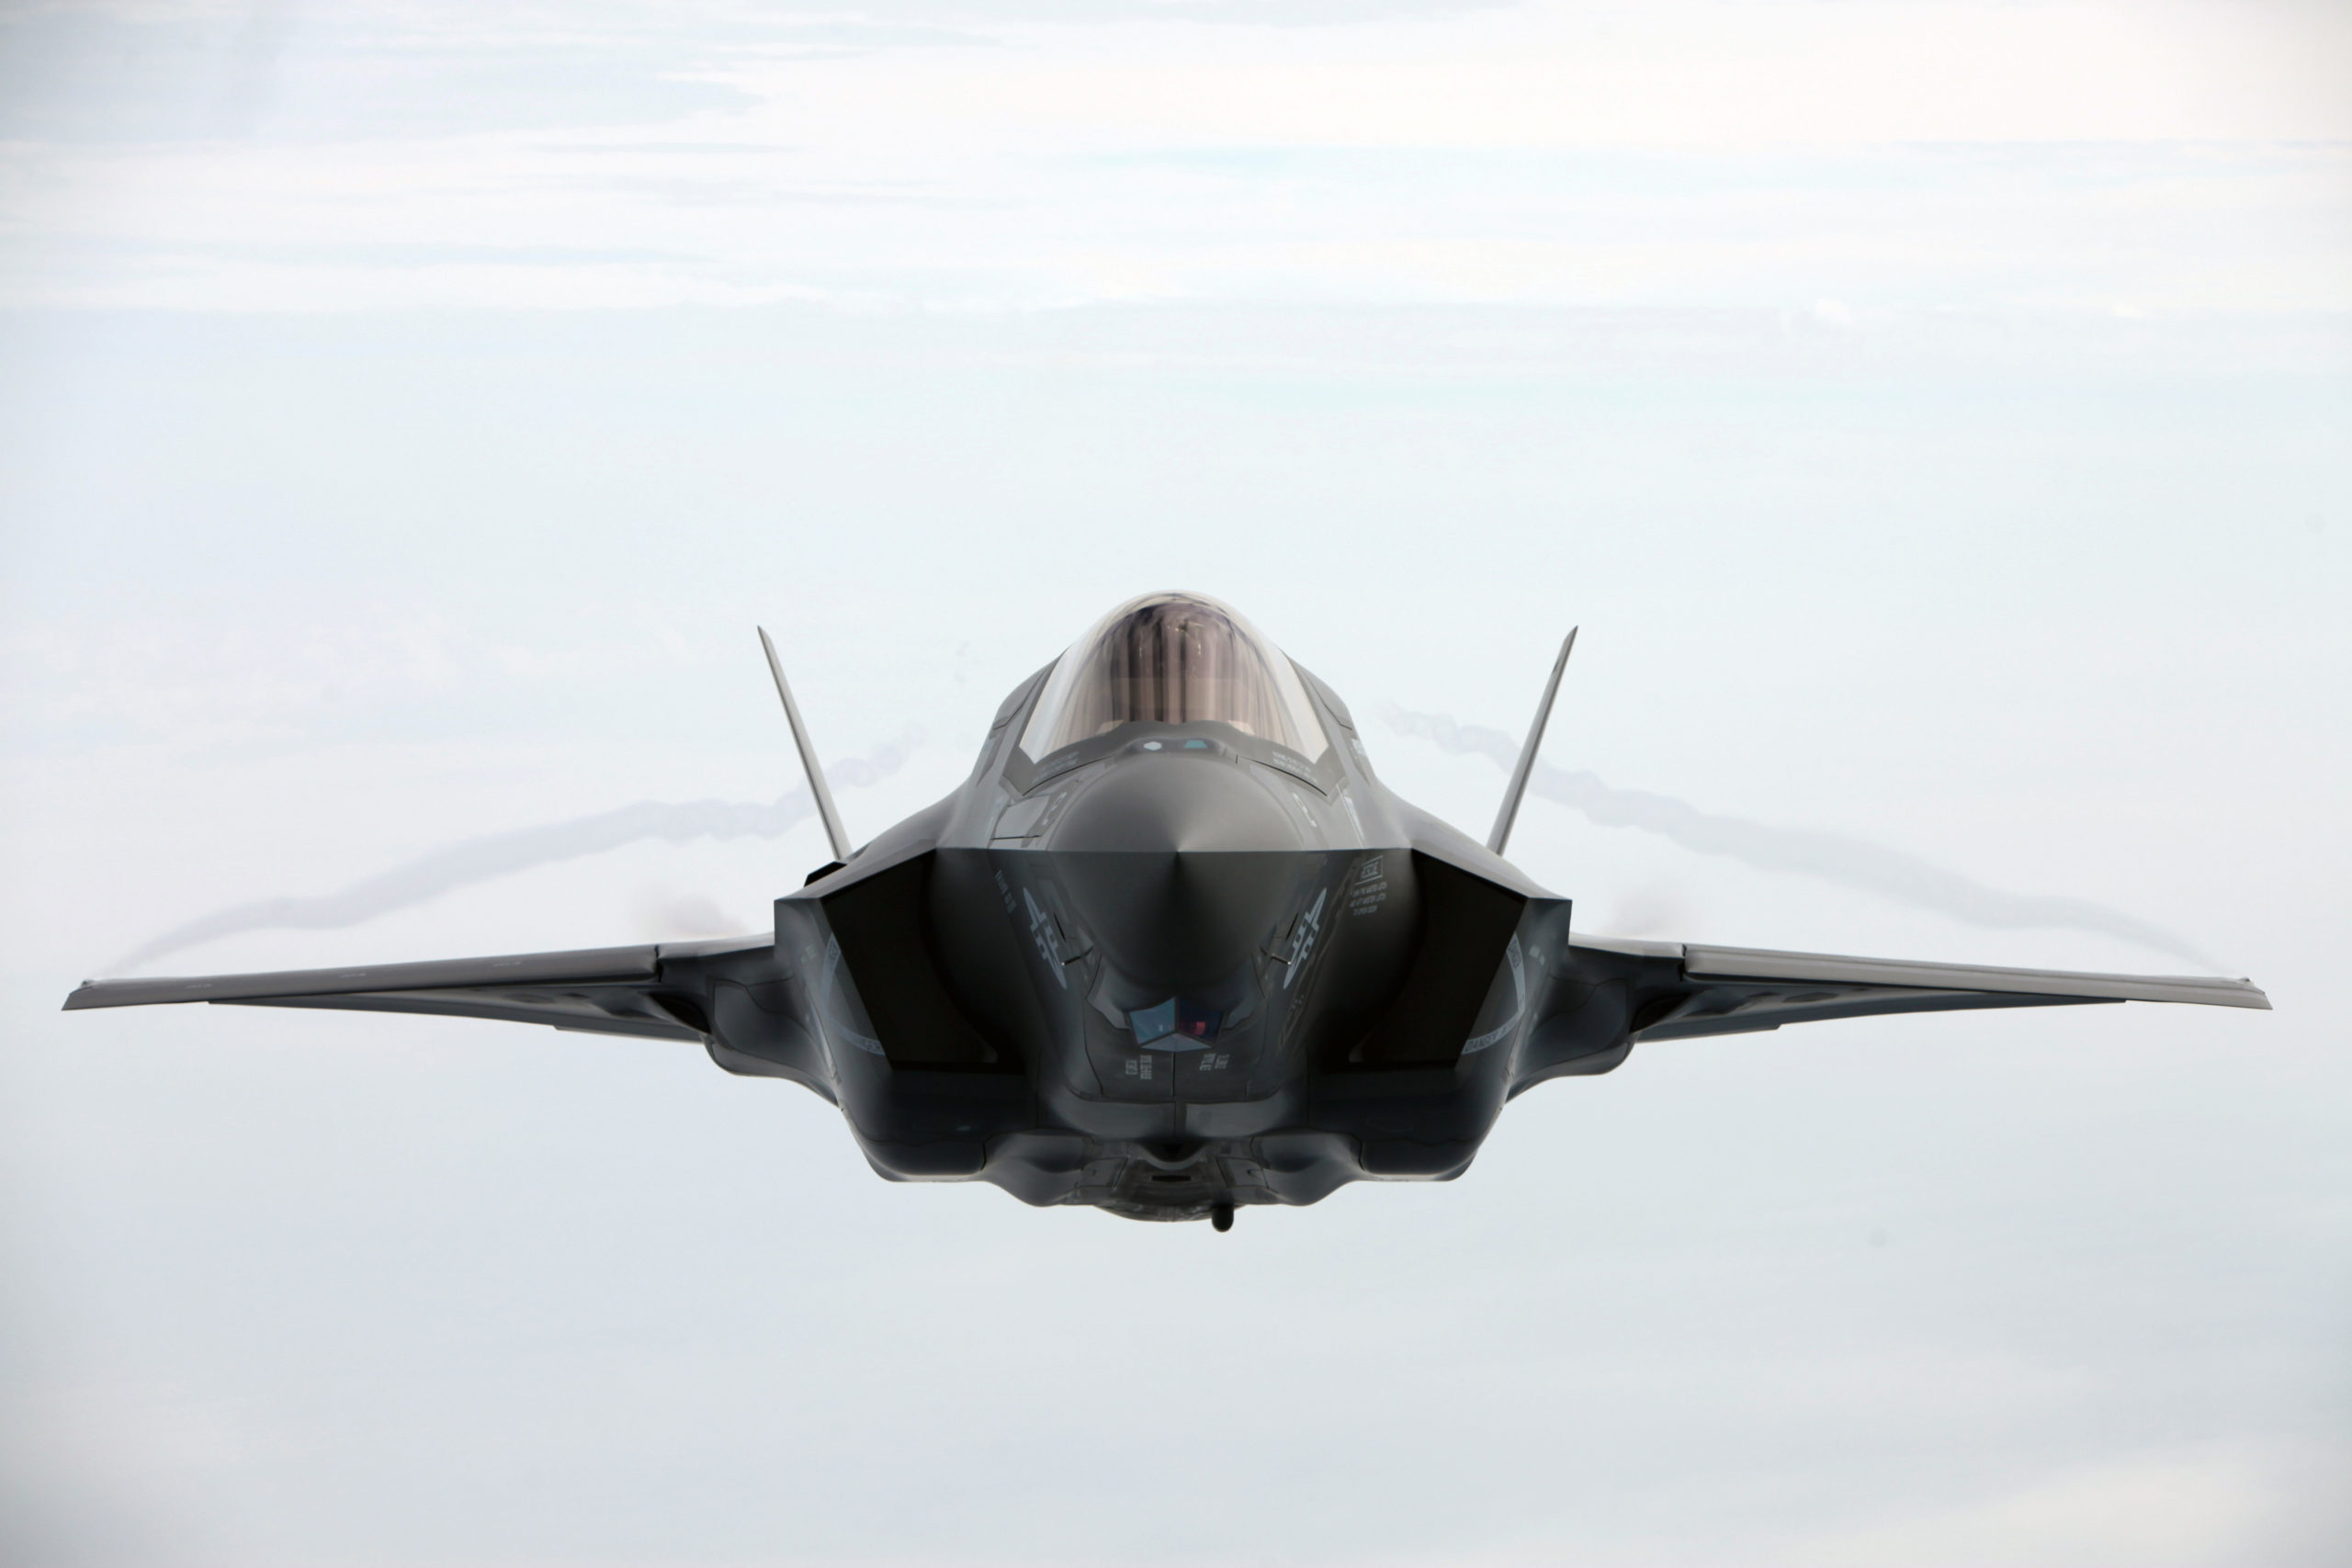 Here’s Your New Wallpaper: A Pitch Perfect Photo Of A F-35